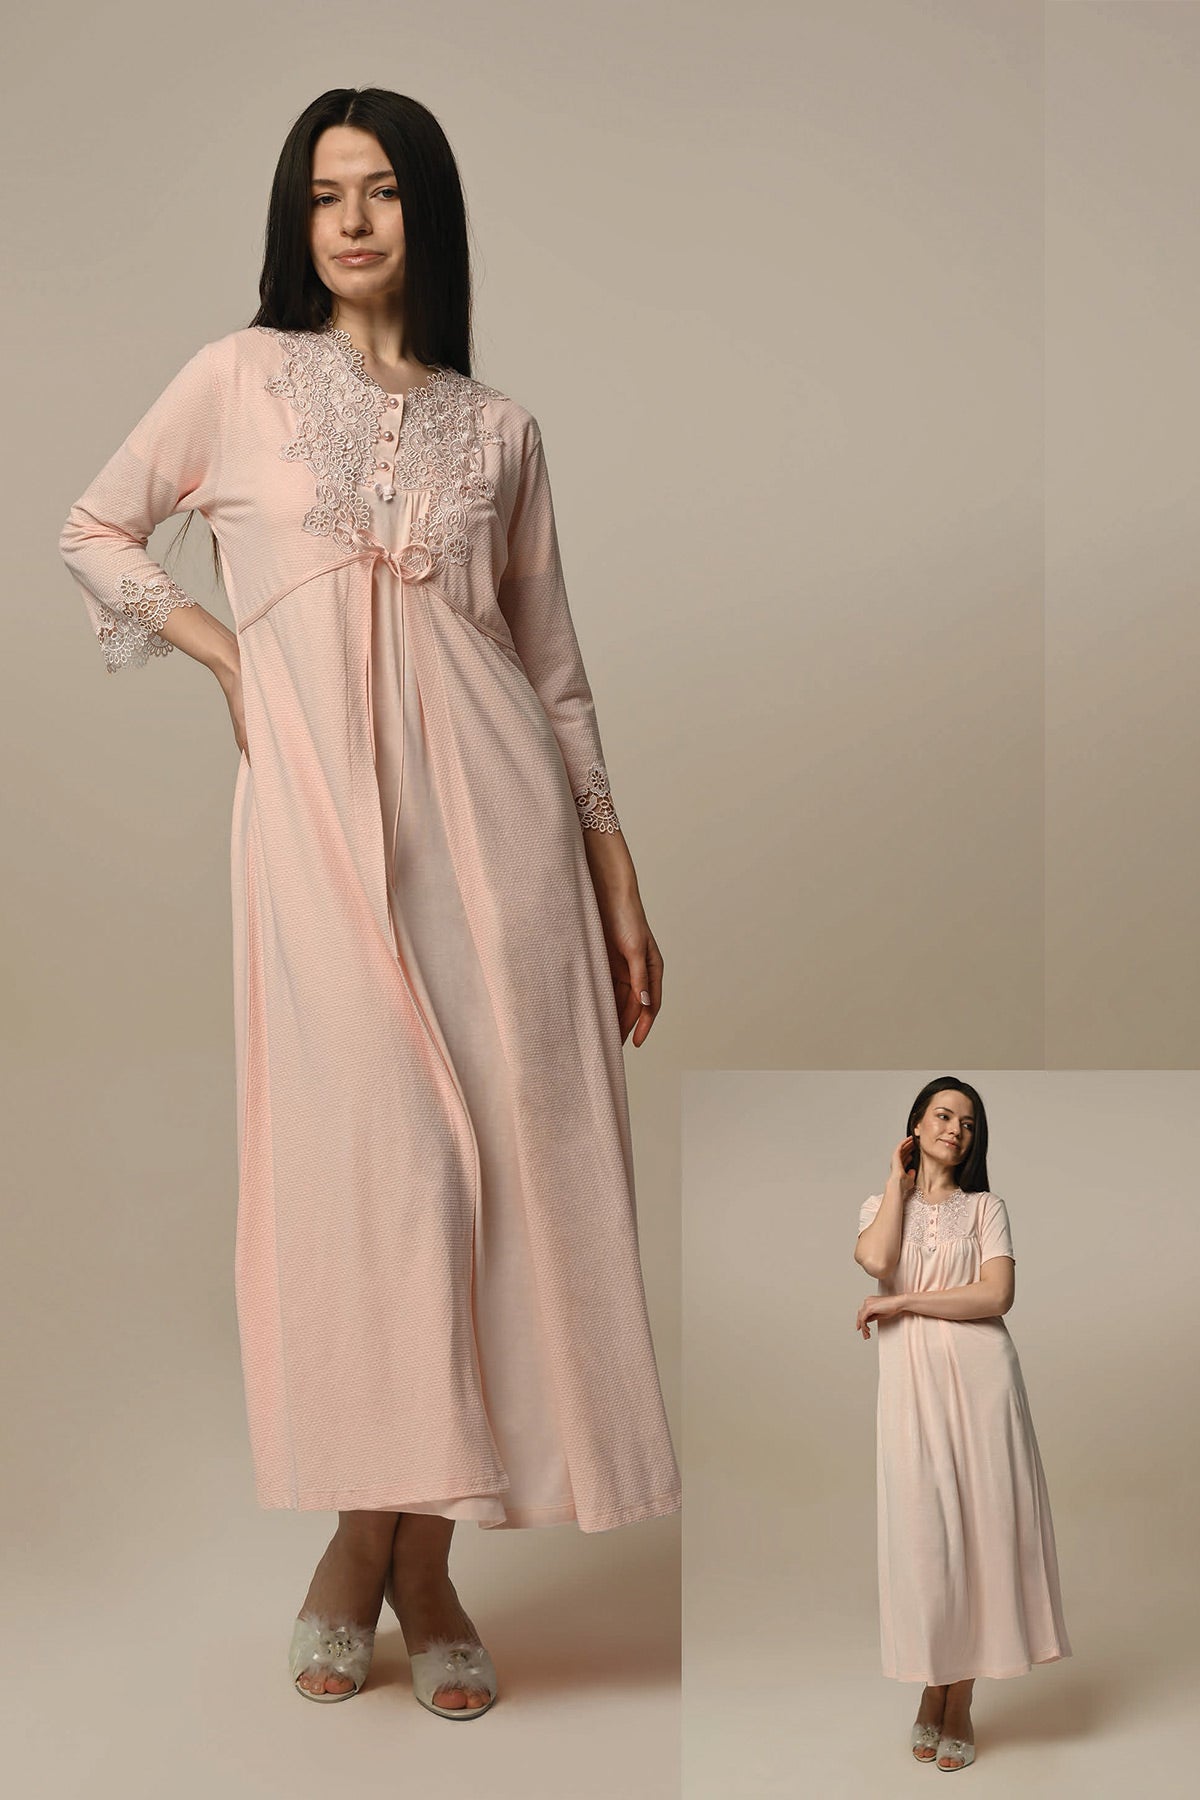 Lace Embroidered Maternity & Nursing Nightgown With Robe Powder - 24509